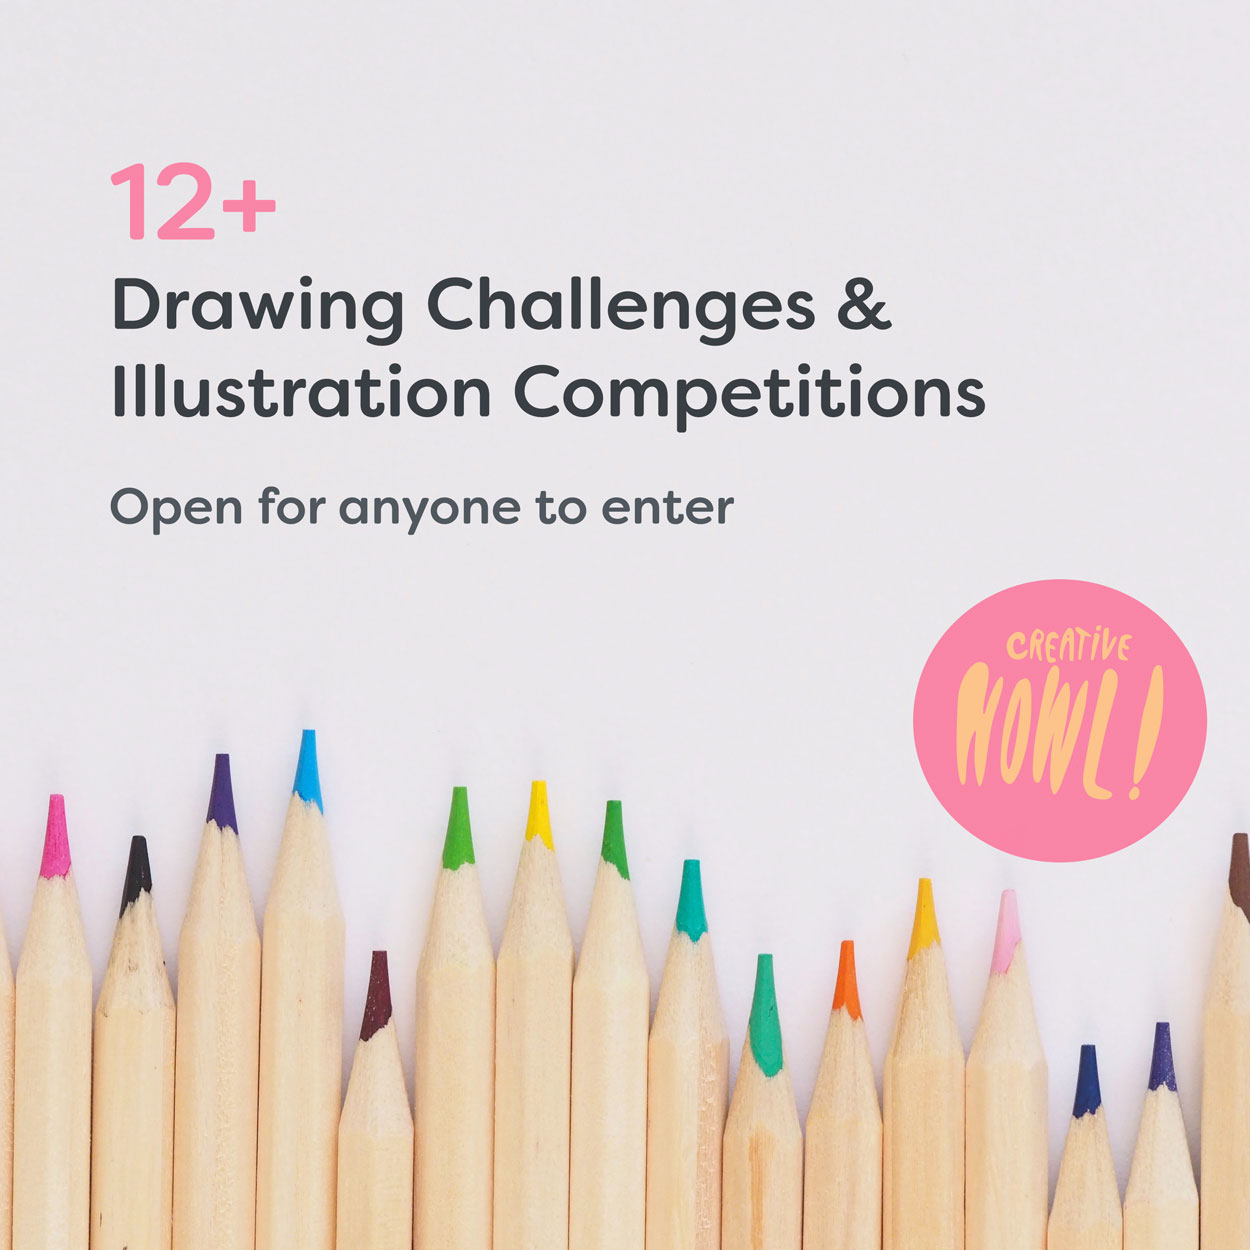 Drawing Challenges & Illustration Competitions